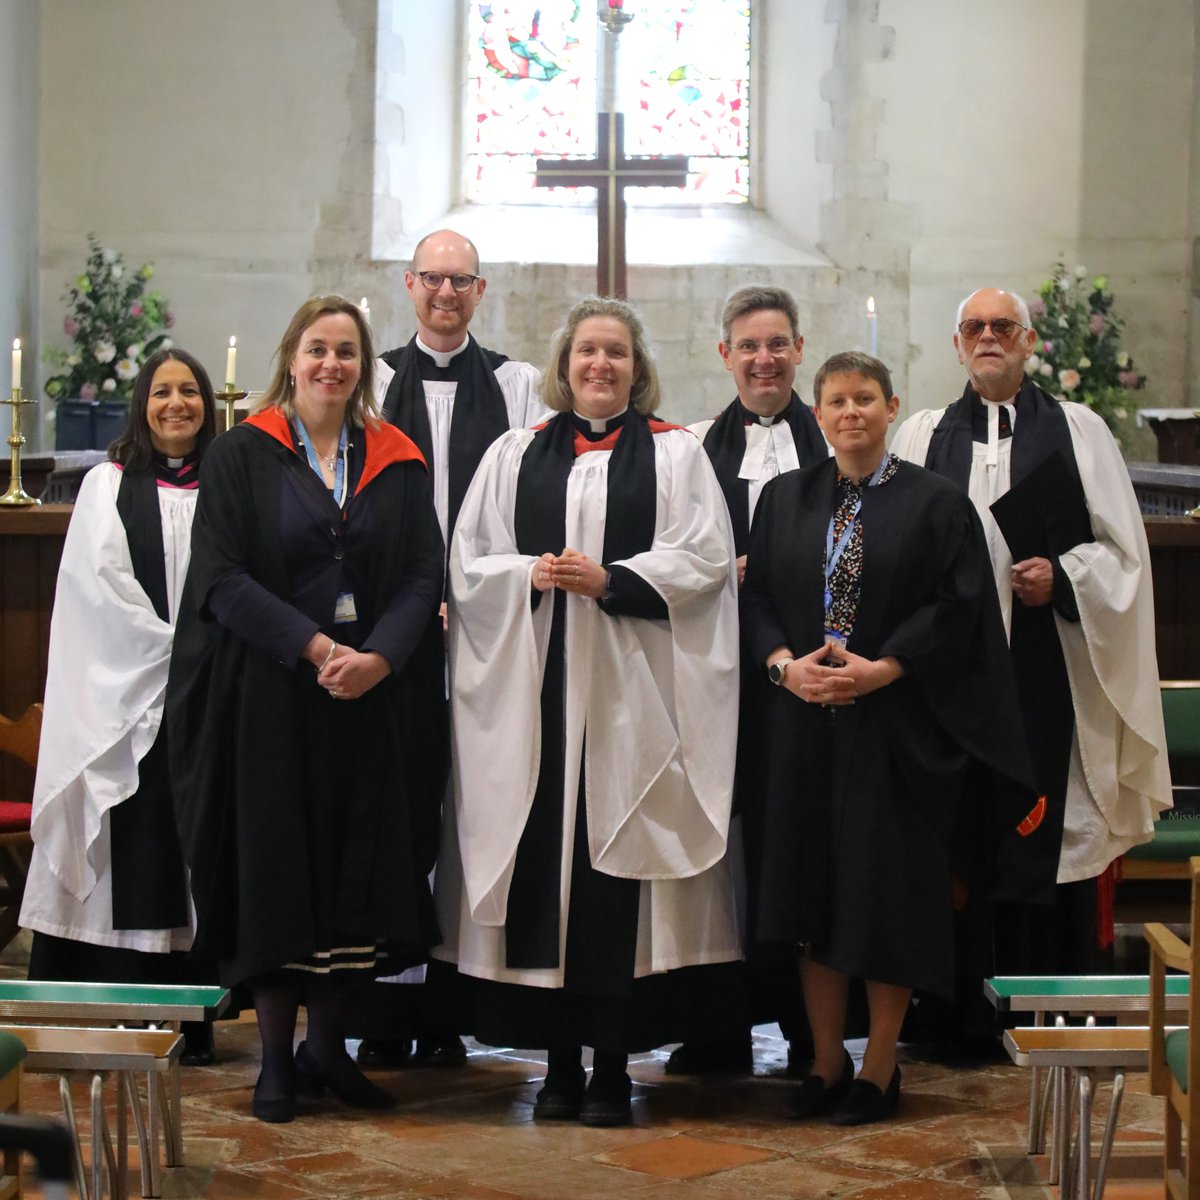 We were delighted to welcome Mother Lucy (The Reverend Lucy Sullivan) as the new Chaplain to Junior King’s this morning during her licensing service in St Nicholas’ Church. The entire community came together to celebrate this special occasion. #welcome #community